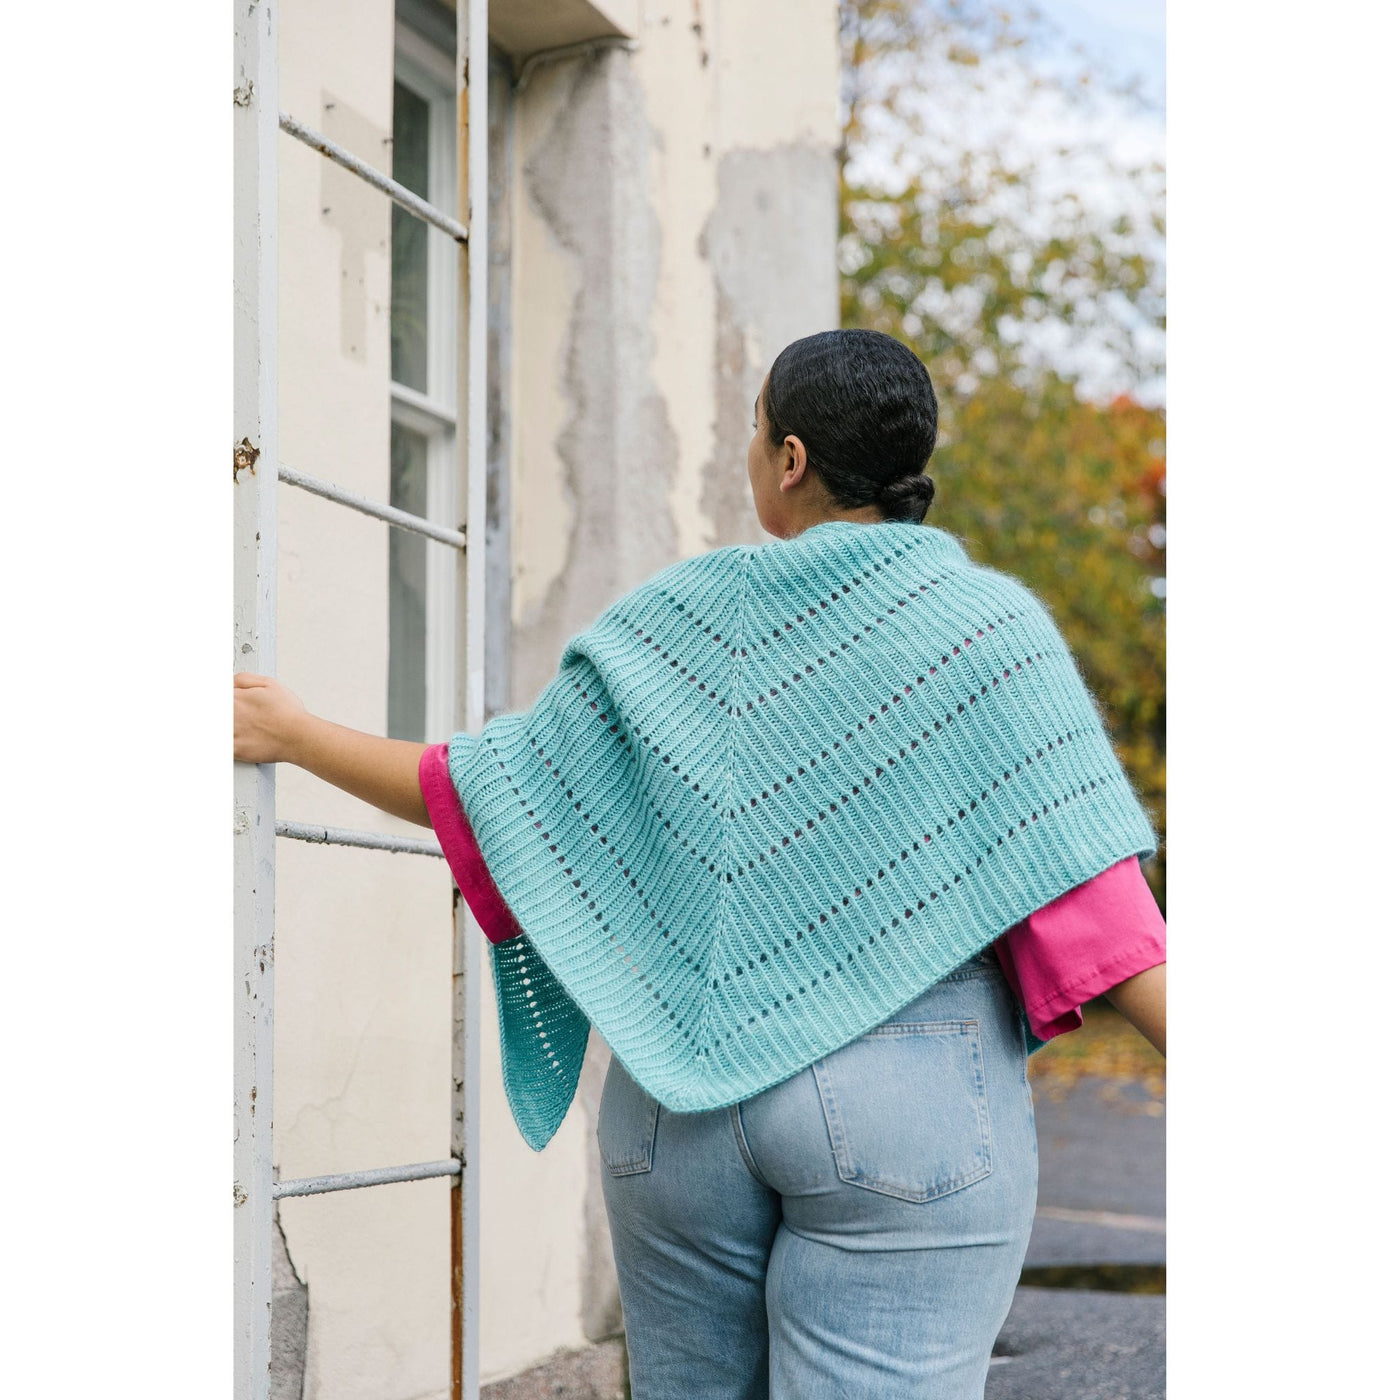 52 Weeks of Easy Knits page shows model wearing one of the knit designs in the book. View of woman from behind. Woman in next a building wearing jeans, a pink shirt, and light blue shawl draped down her back. 